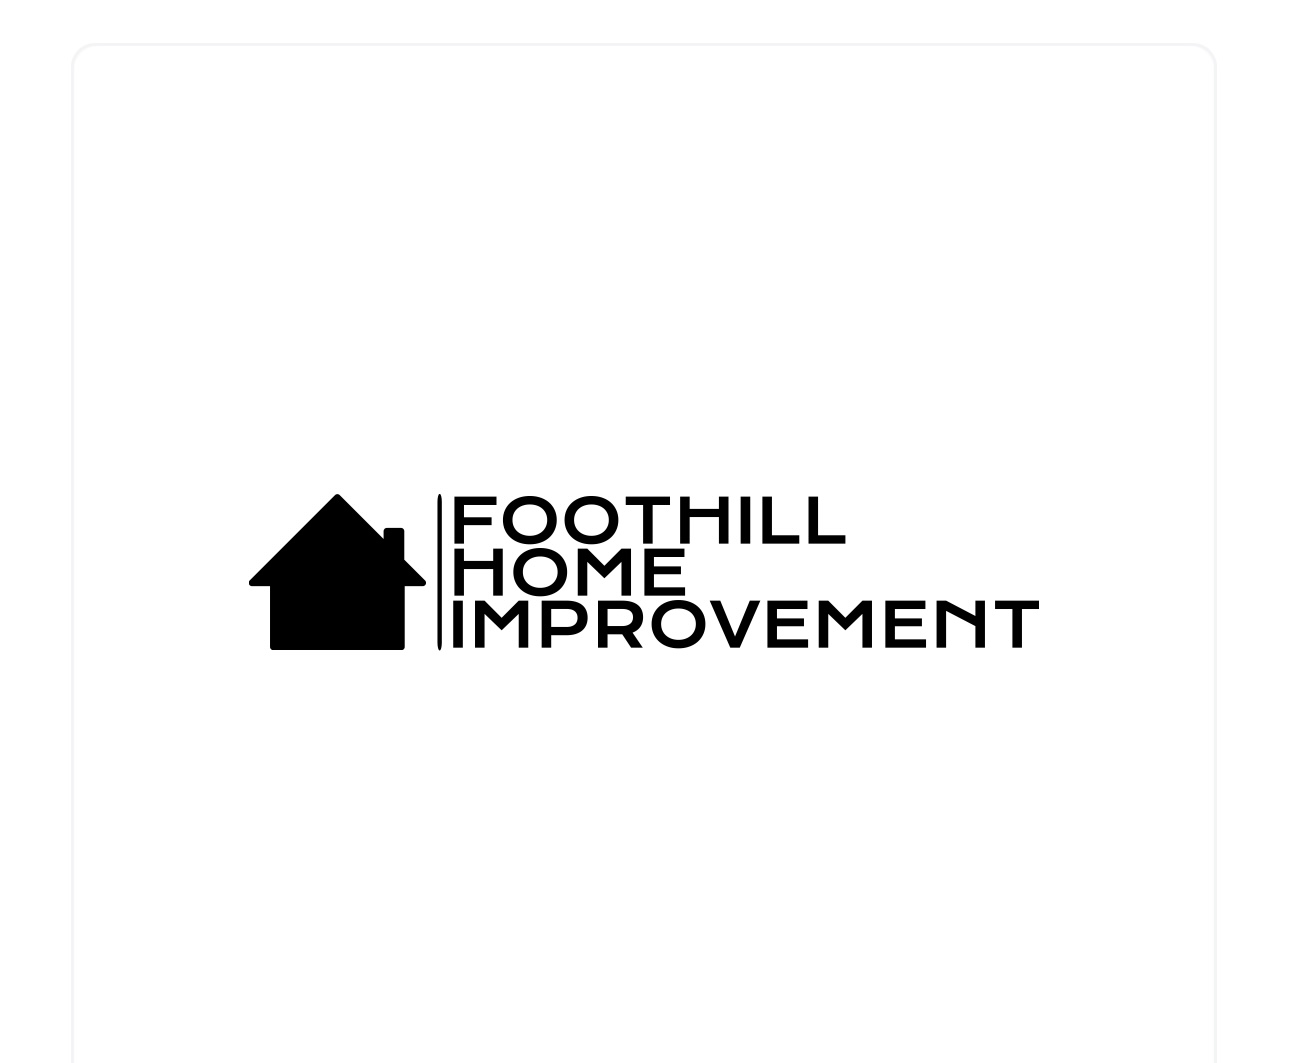 Foothill Home Improvement - Unlicensed Contractor Logo